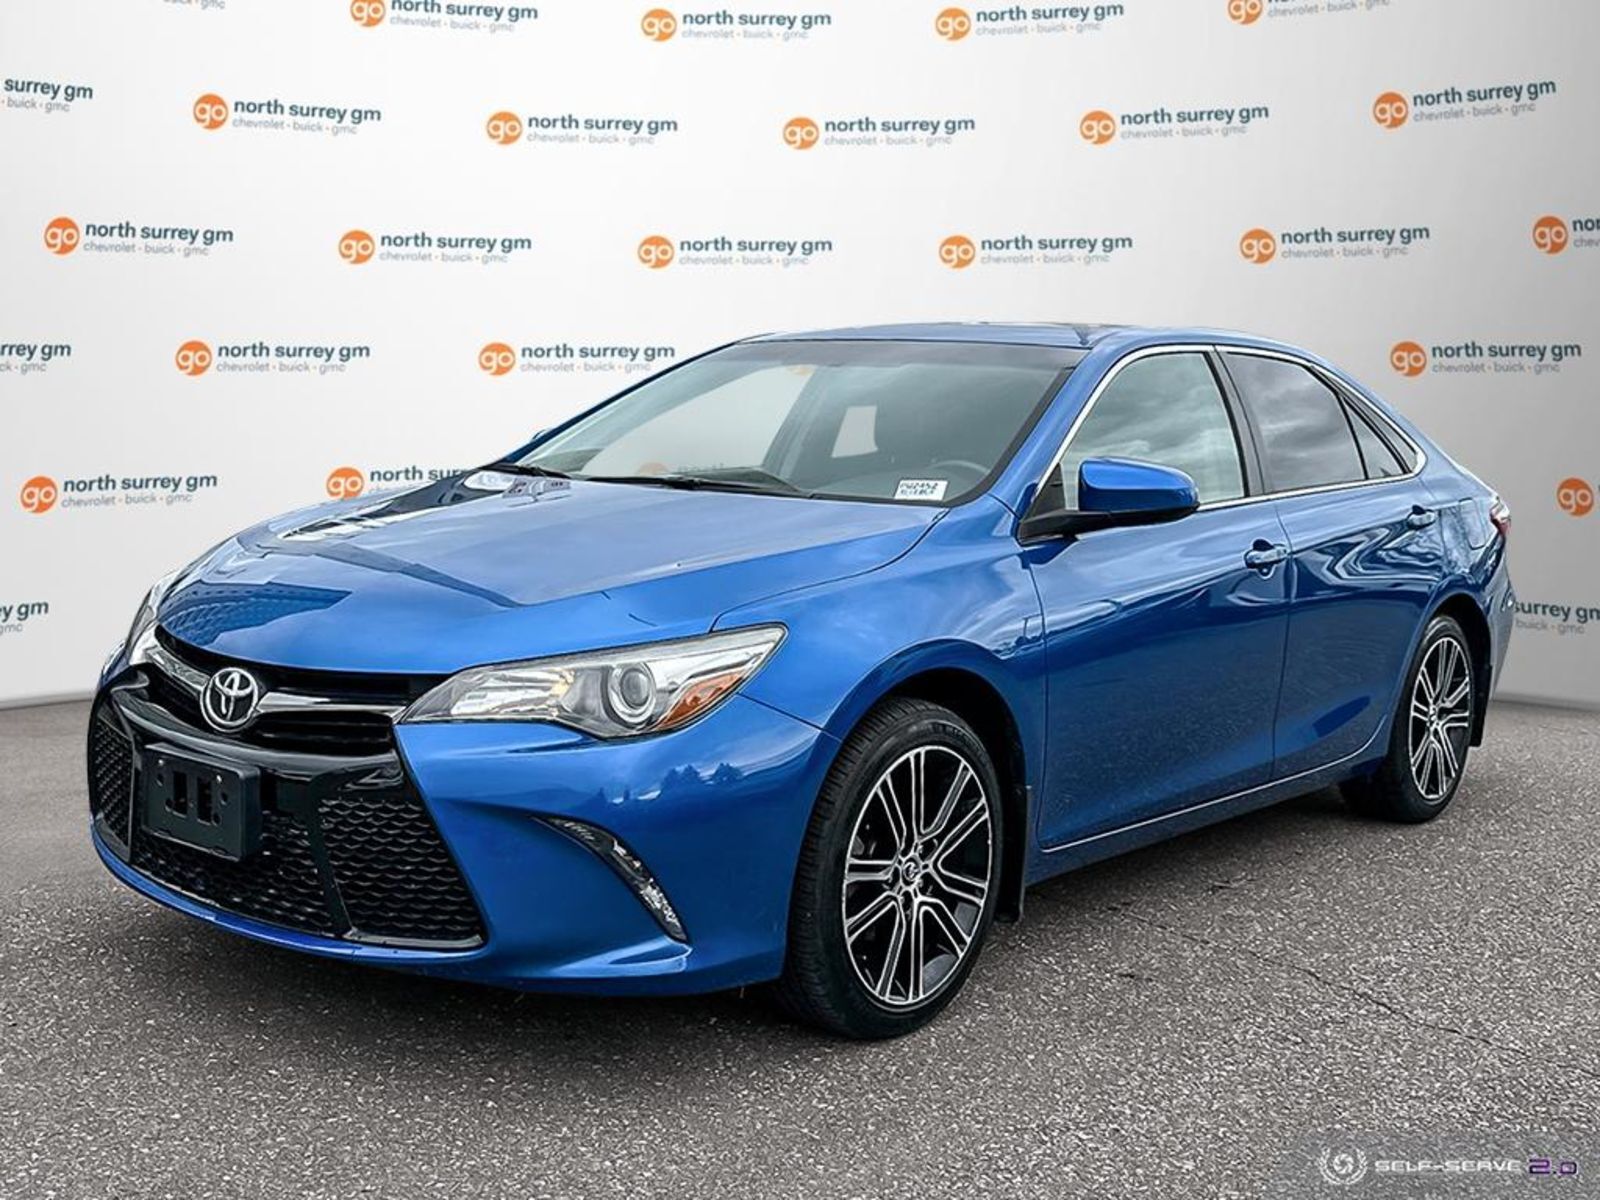 2016 Toyota Camry SE - Low Kms / Sunroof / Rear View Cam / No Extra 